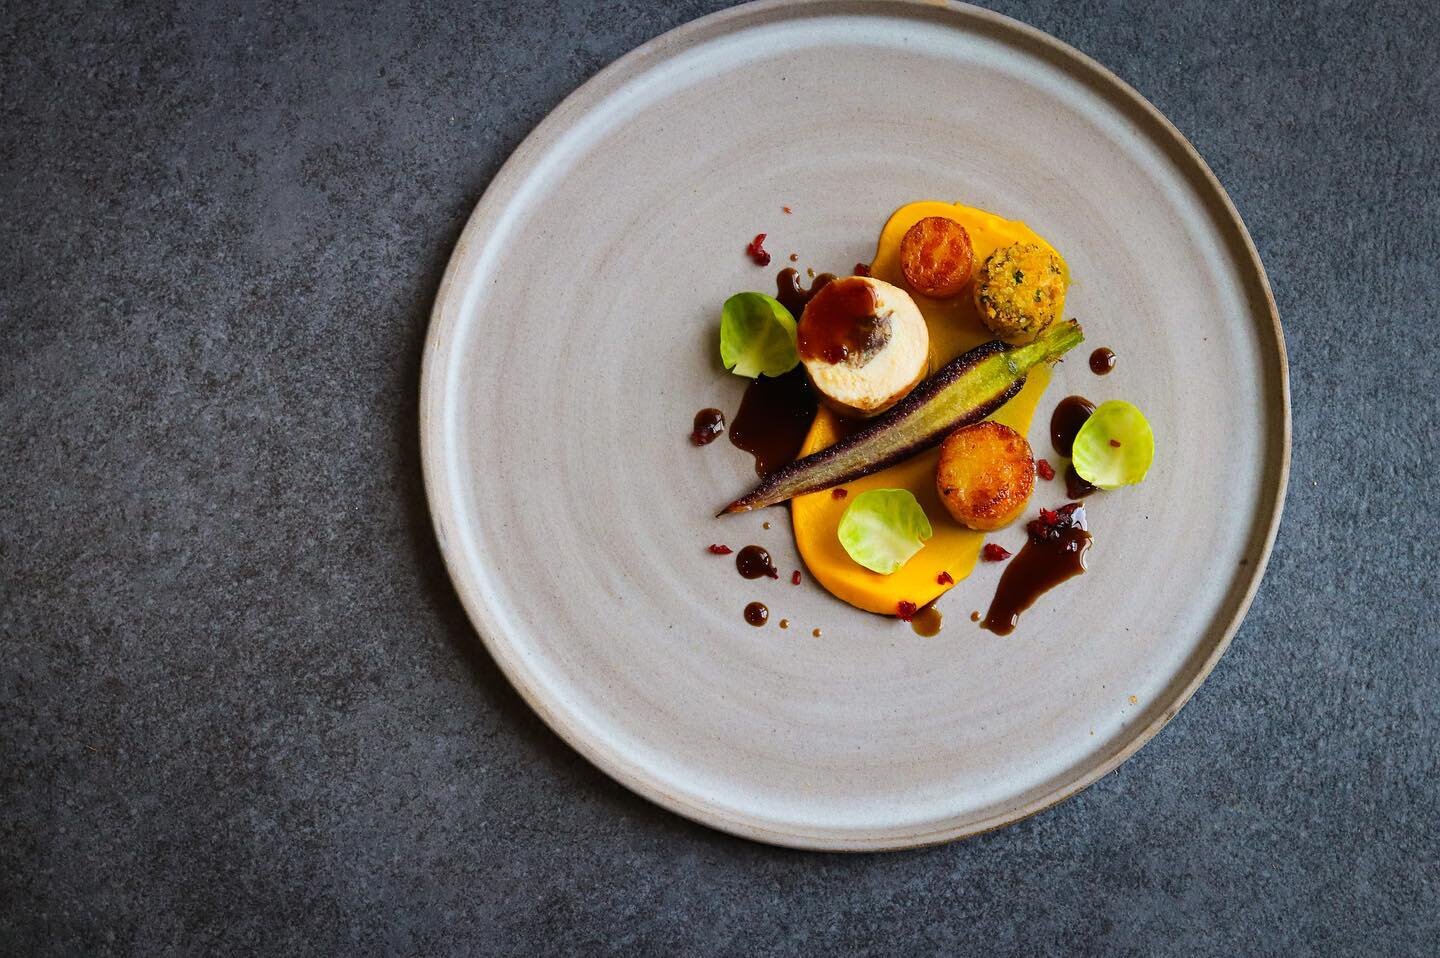 For years I&rsquo;ve wanted to post a main course dish from my Christmas Dinner Tasting Menu, but I have always been too busy in the kitchen. This year, as&nbsp;nothing is normal, I am finding the time to do it! We are currently serving this year's 1